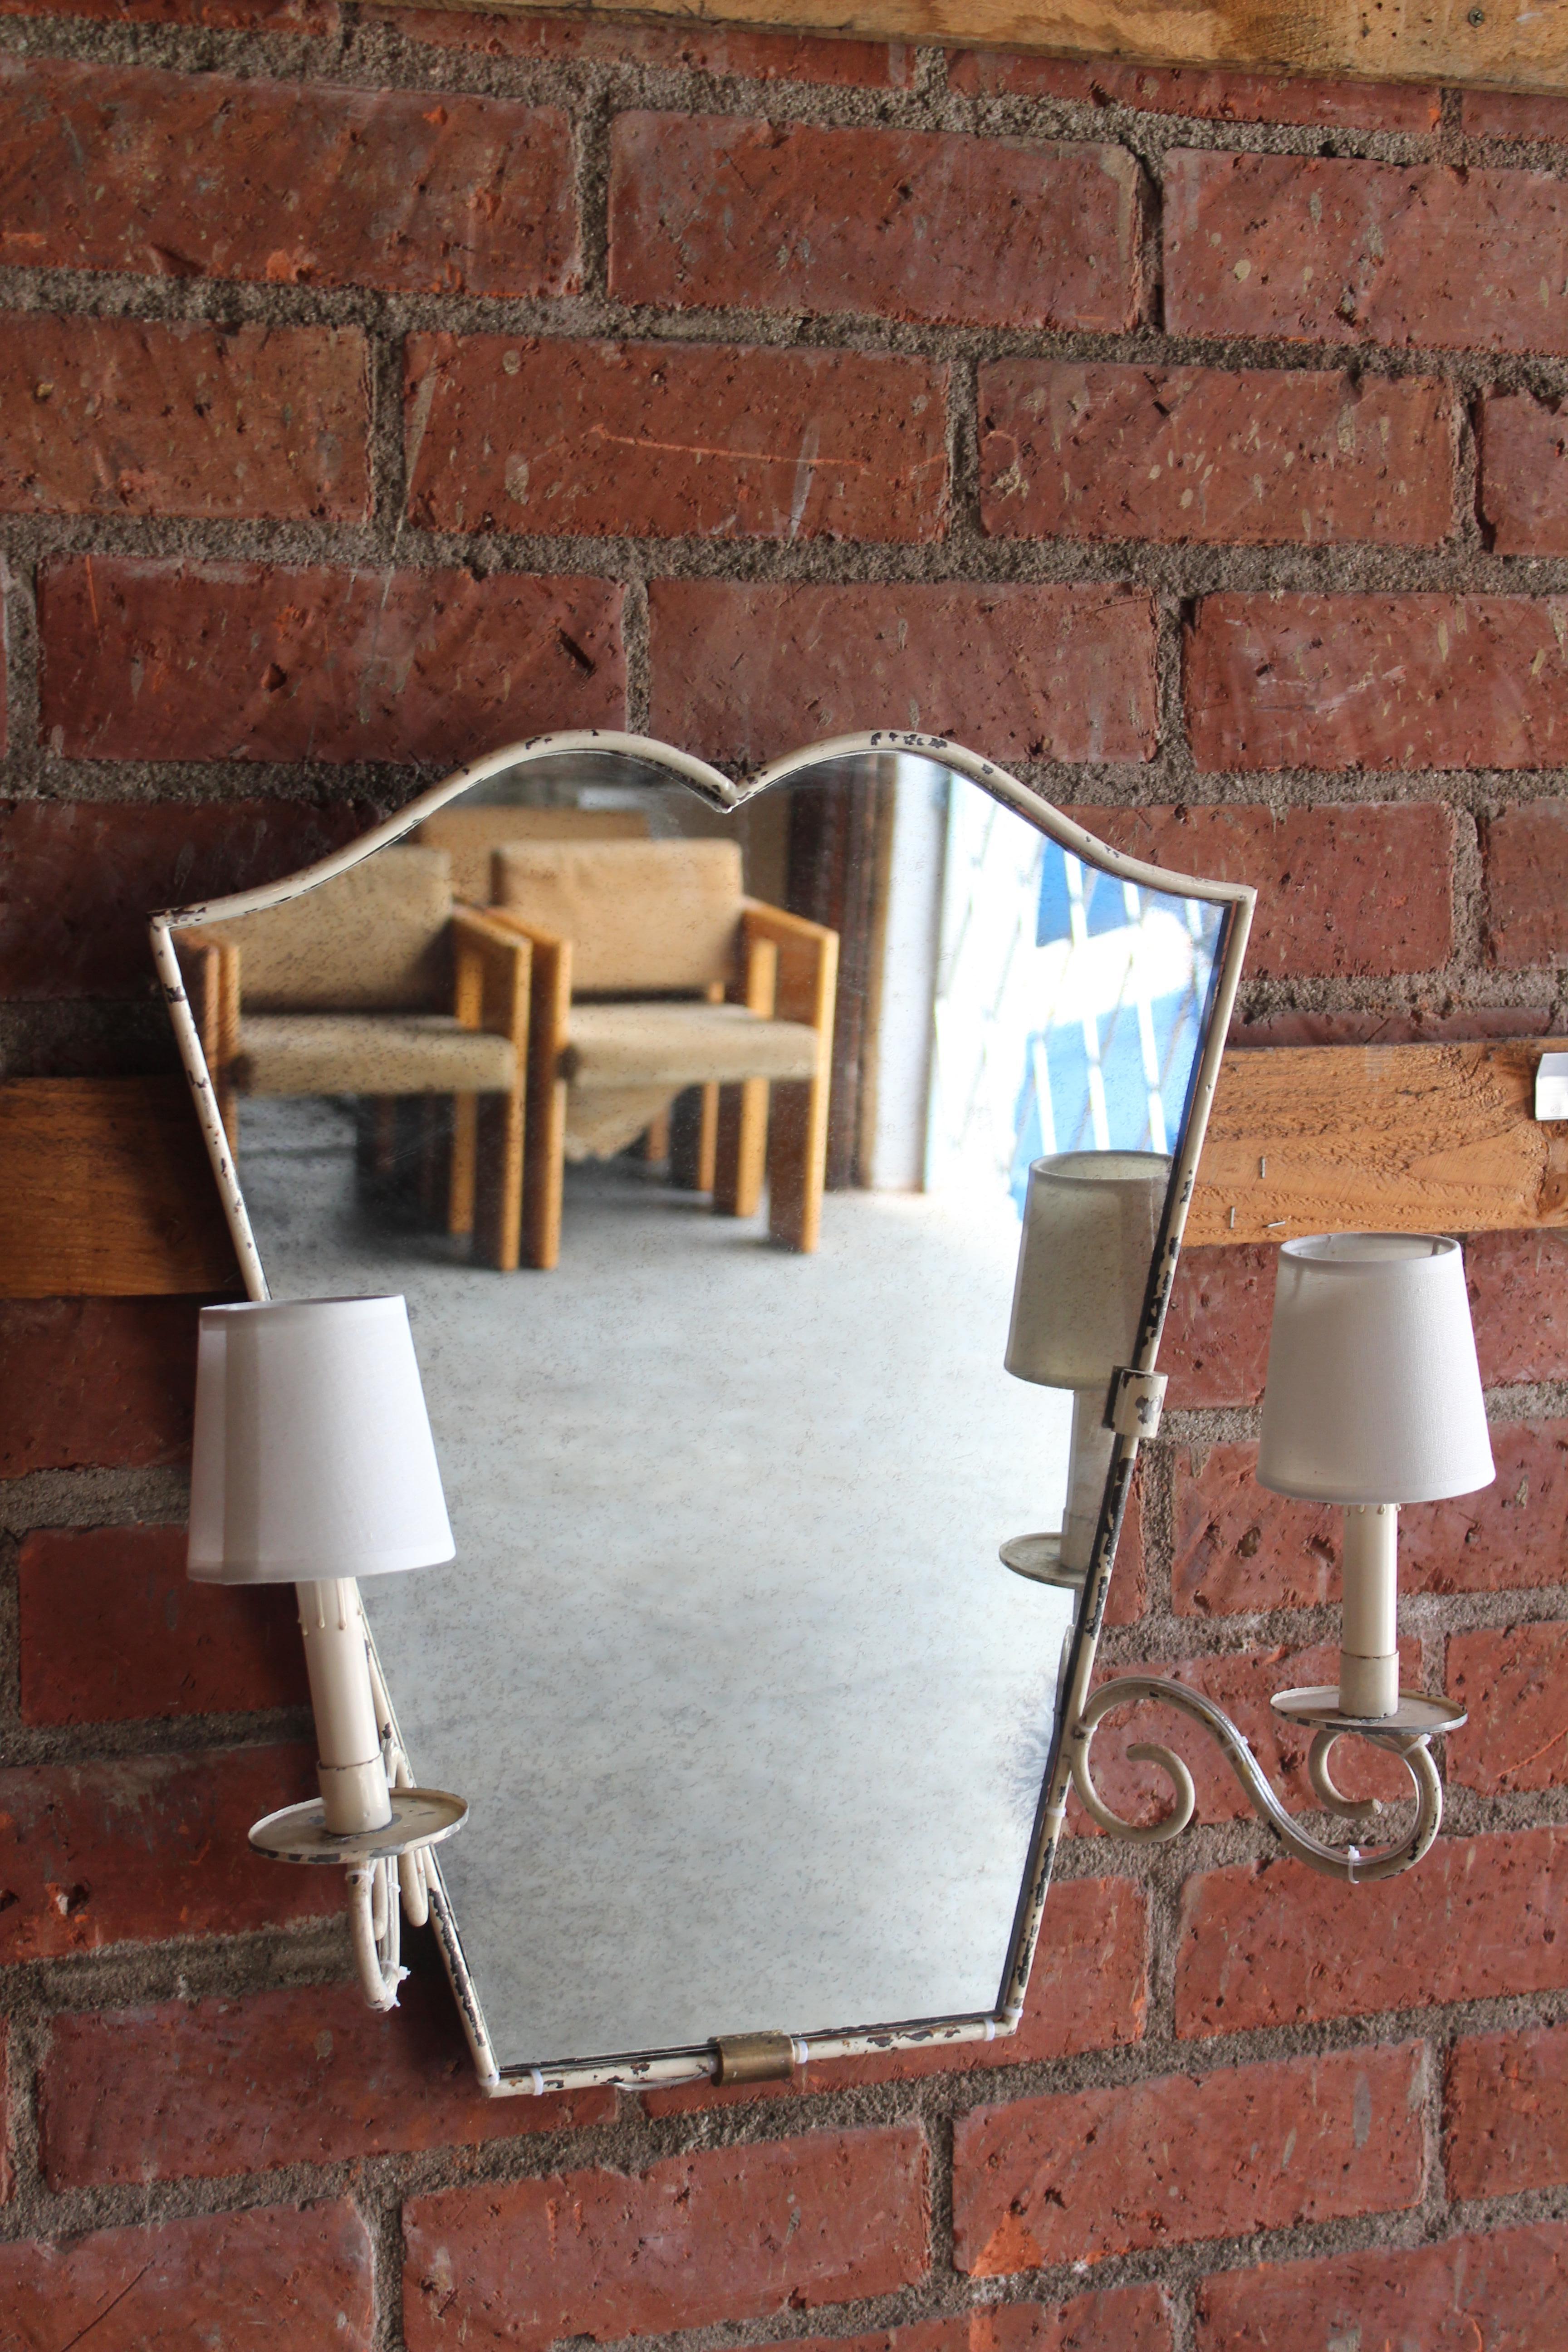 A vintage 1950s French iron wall mirror with two attached lights. In original white enamel coating which shows some wear. The mirror has been replaced with an antique mirror. Newly rewired. Uses two standard candelabra bulbs.